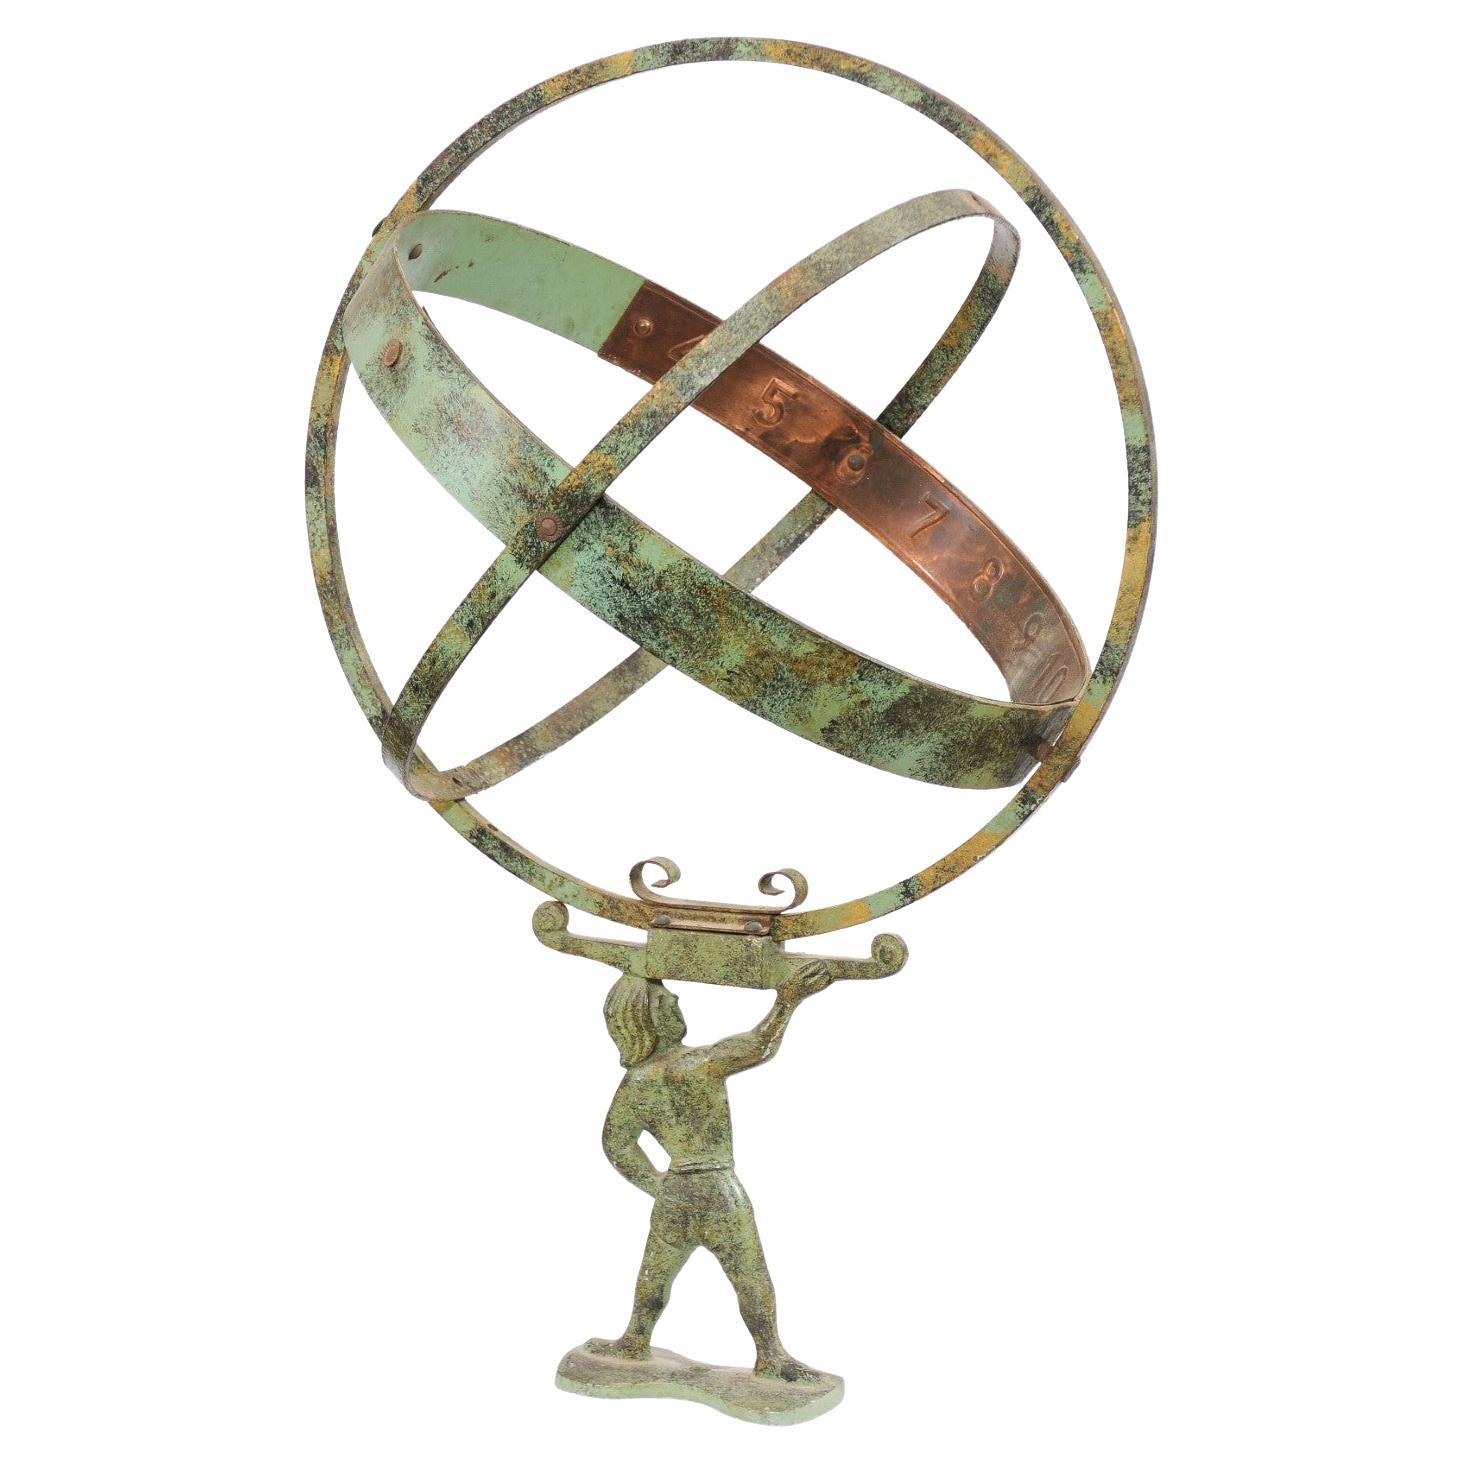 What does an armillary sphere do?